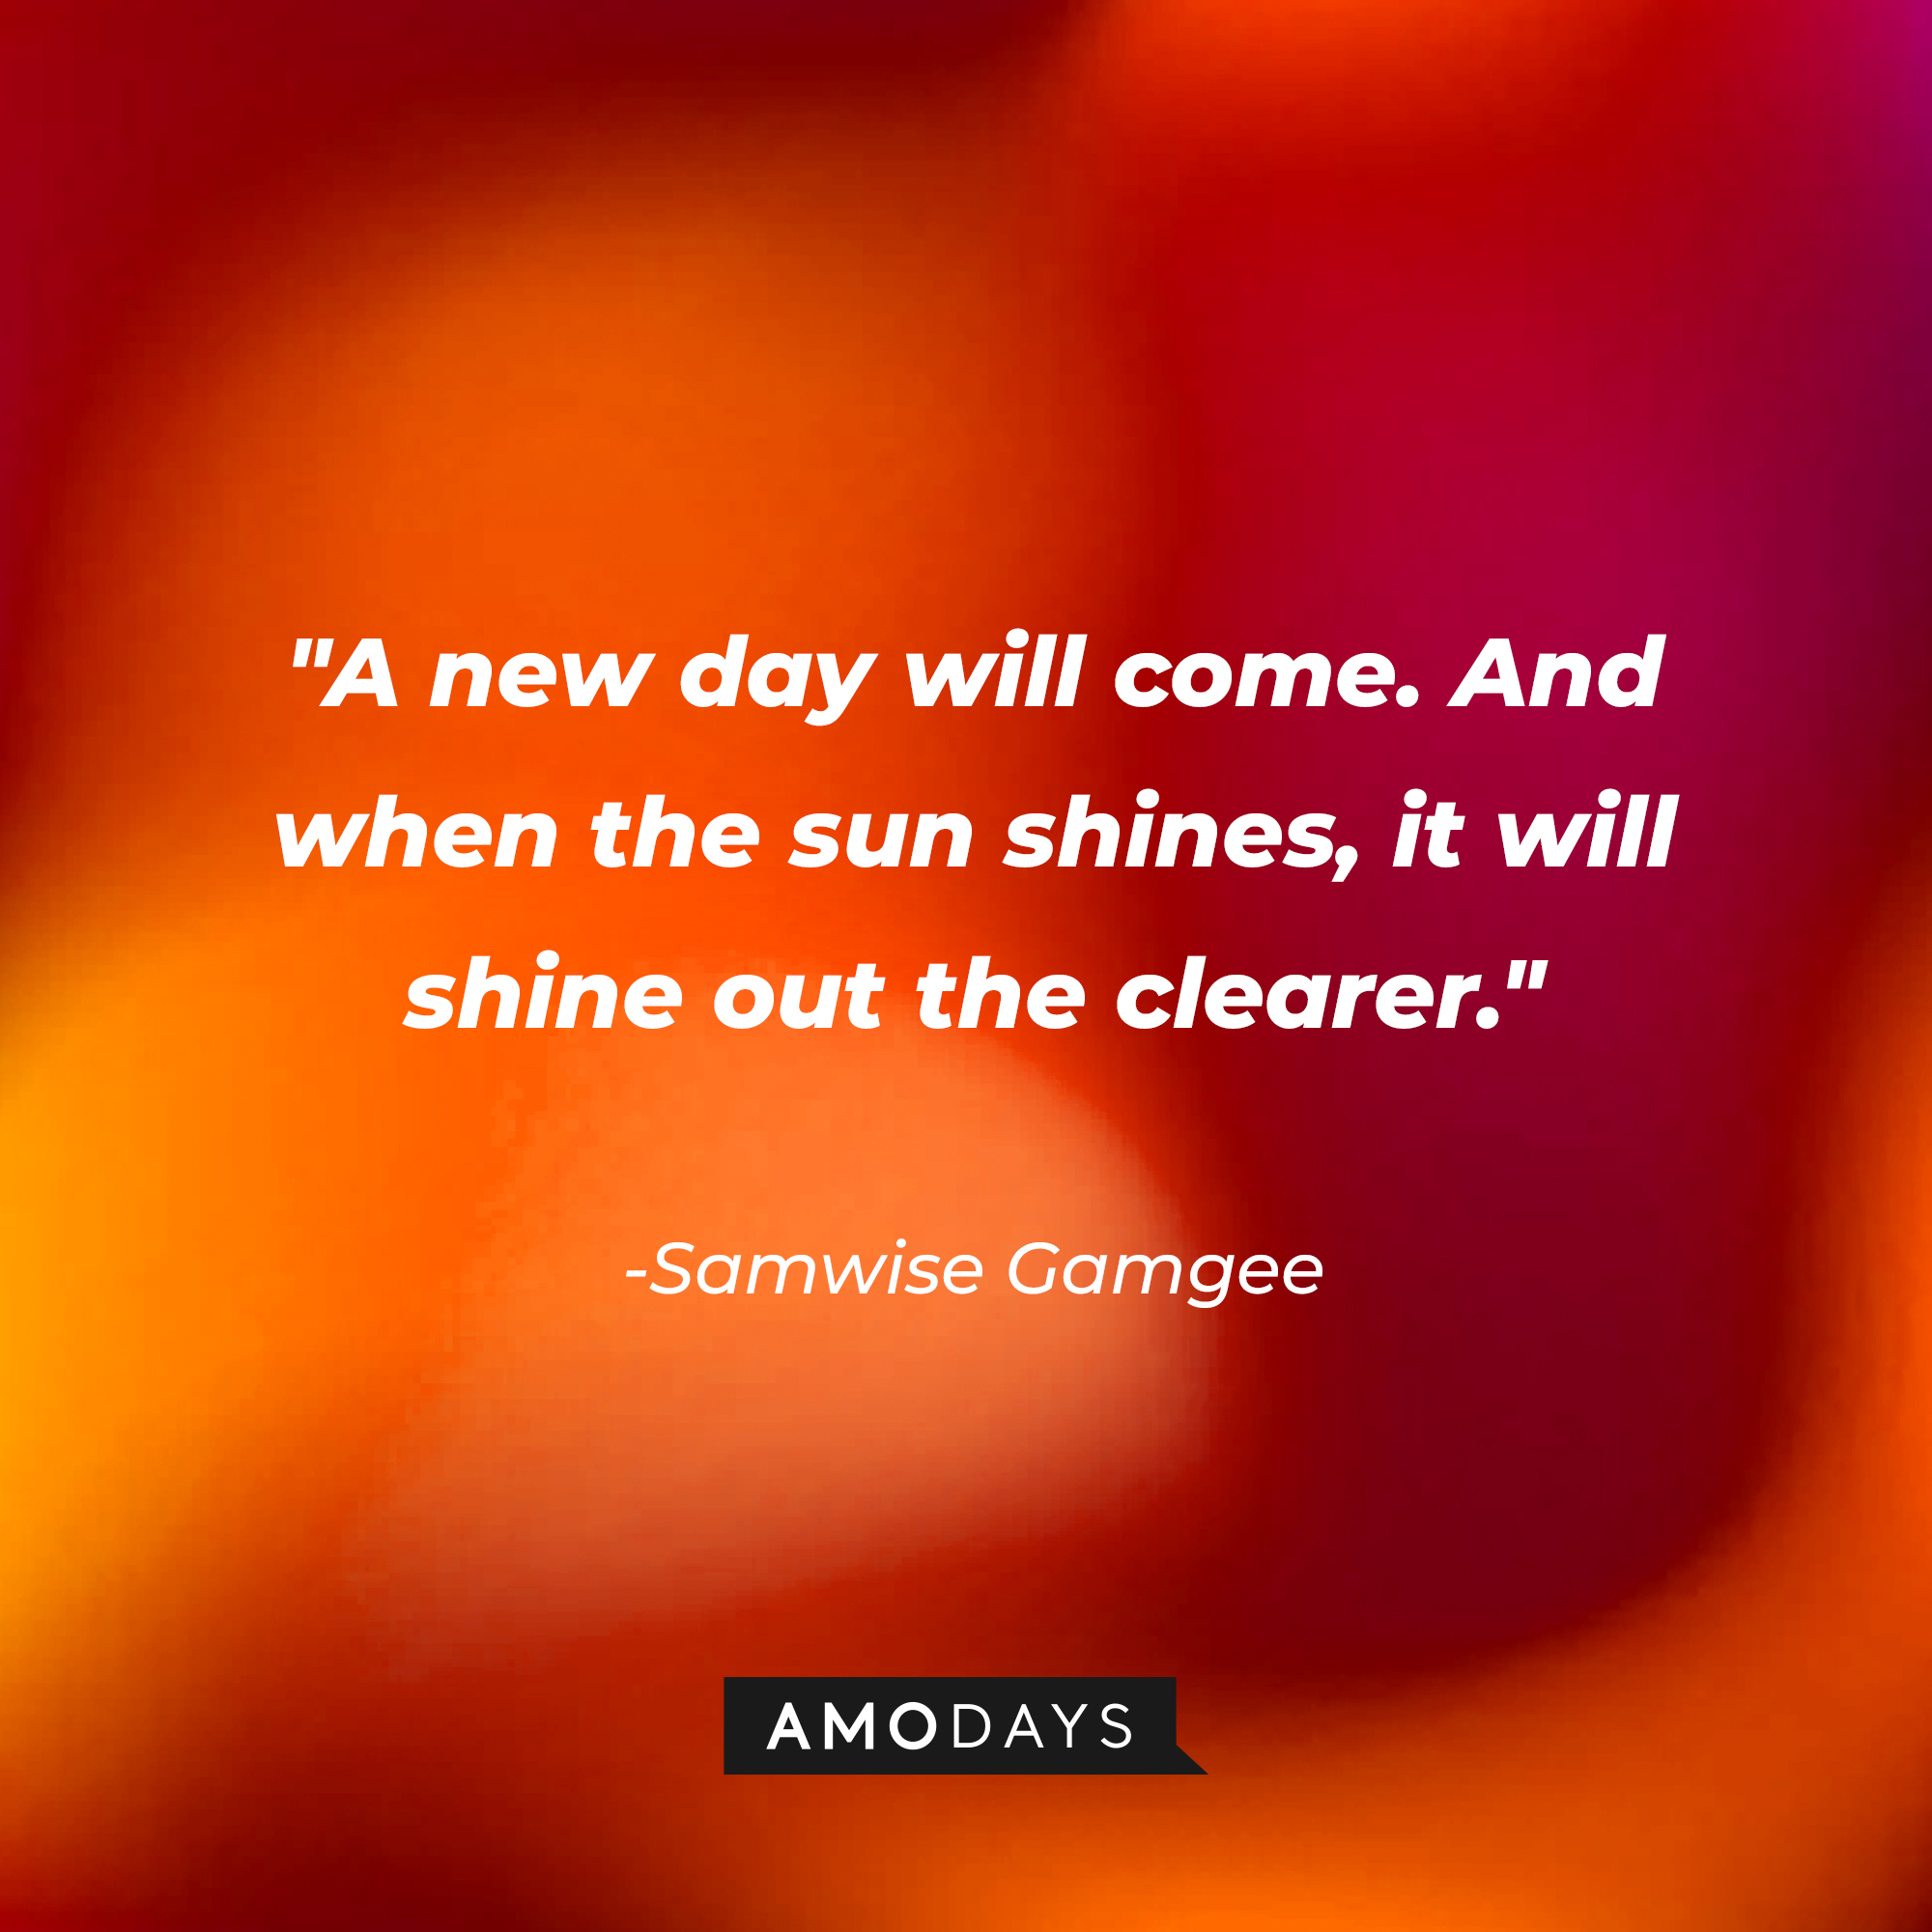 Samwise Gamgee’s quote: “A new day will come. And when the sun shines, it will shine out the clearer.” | Source: AmoDays